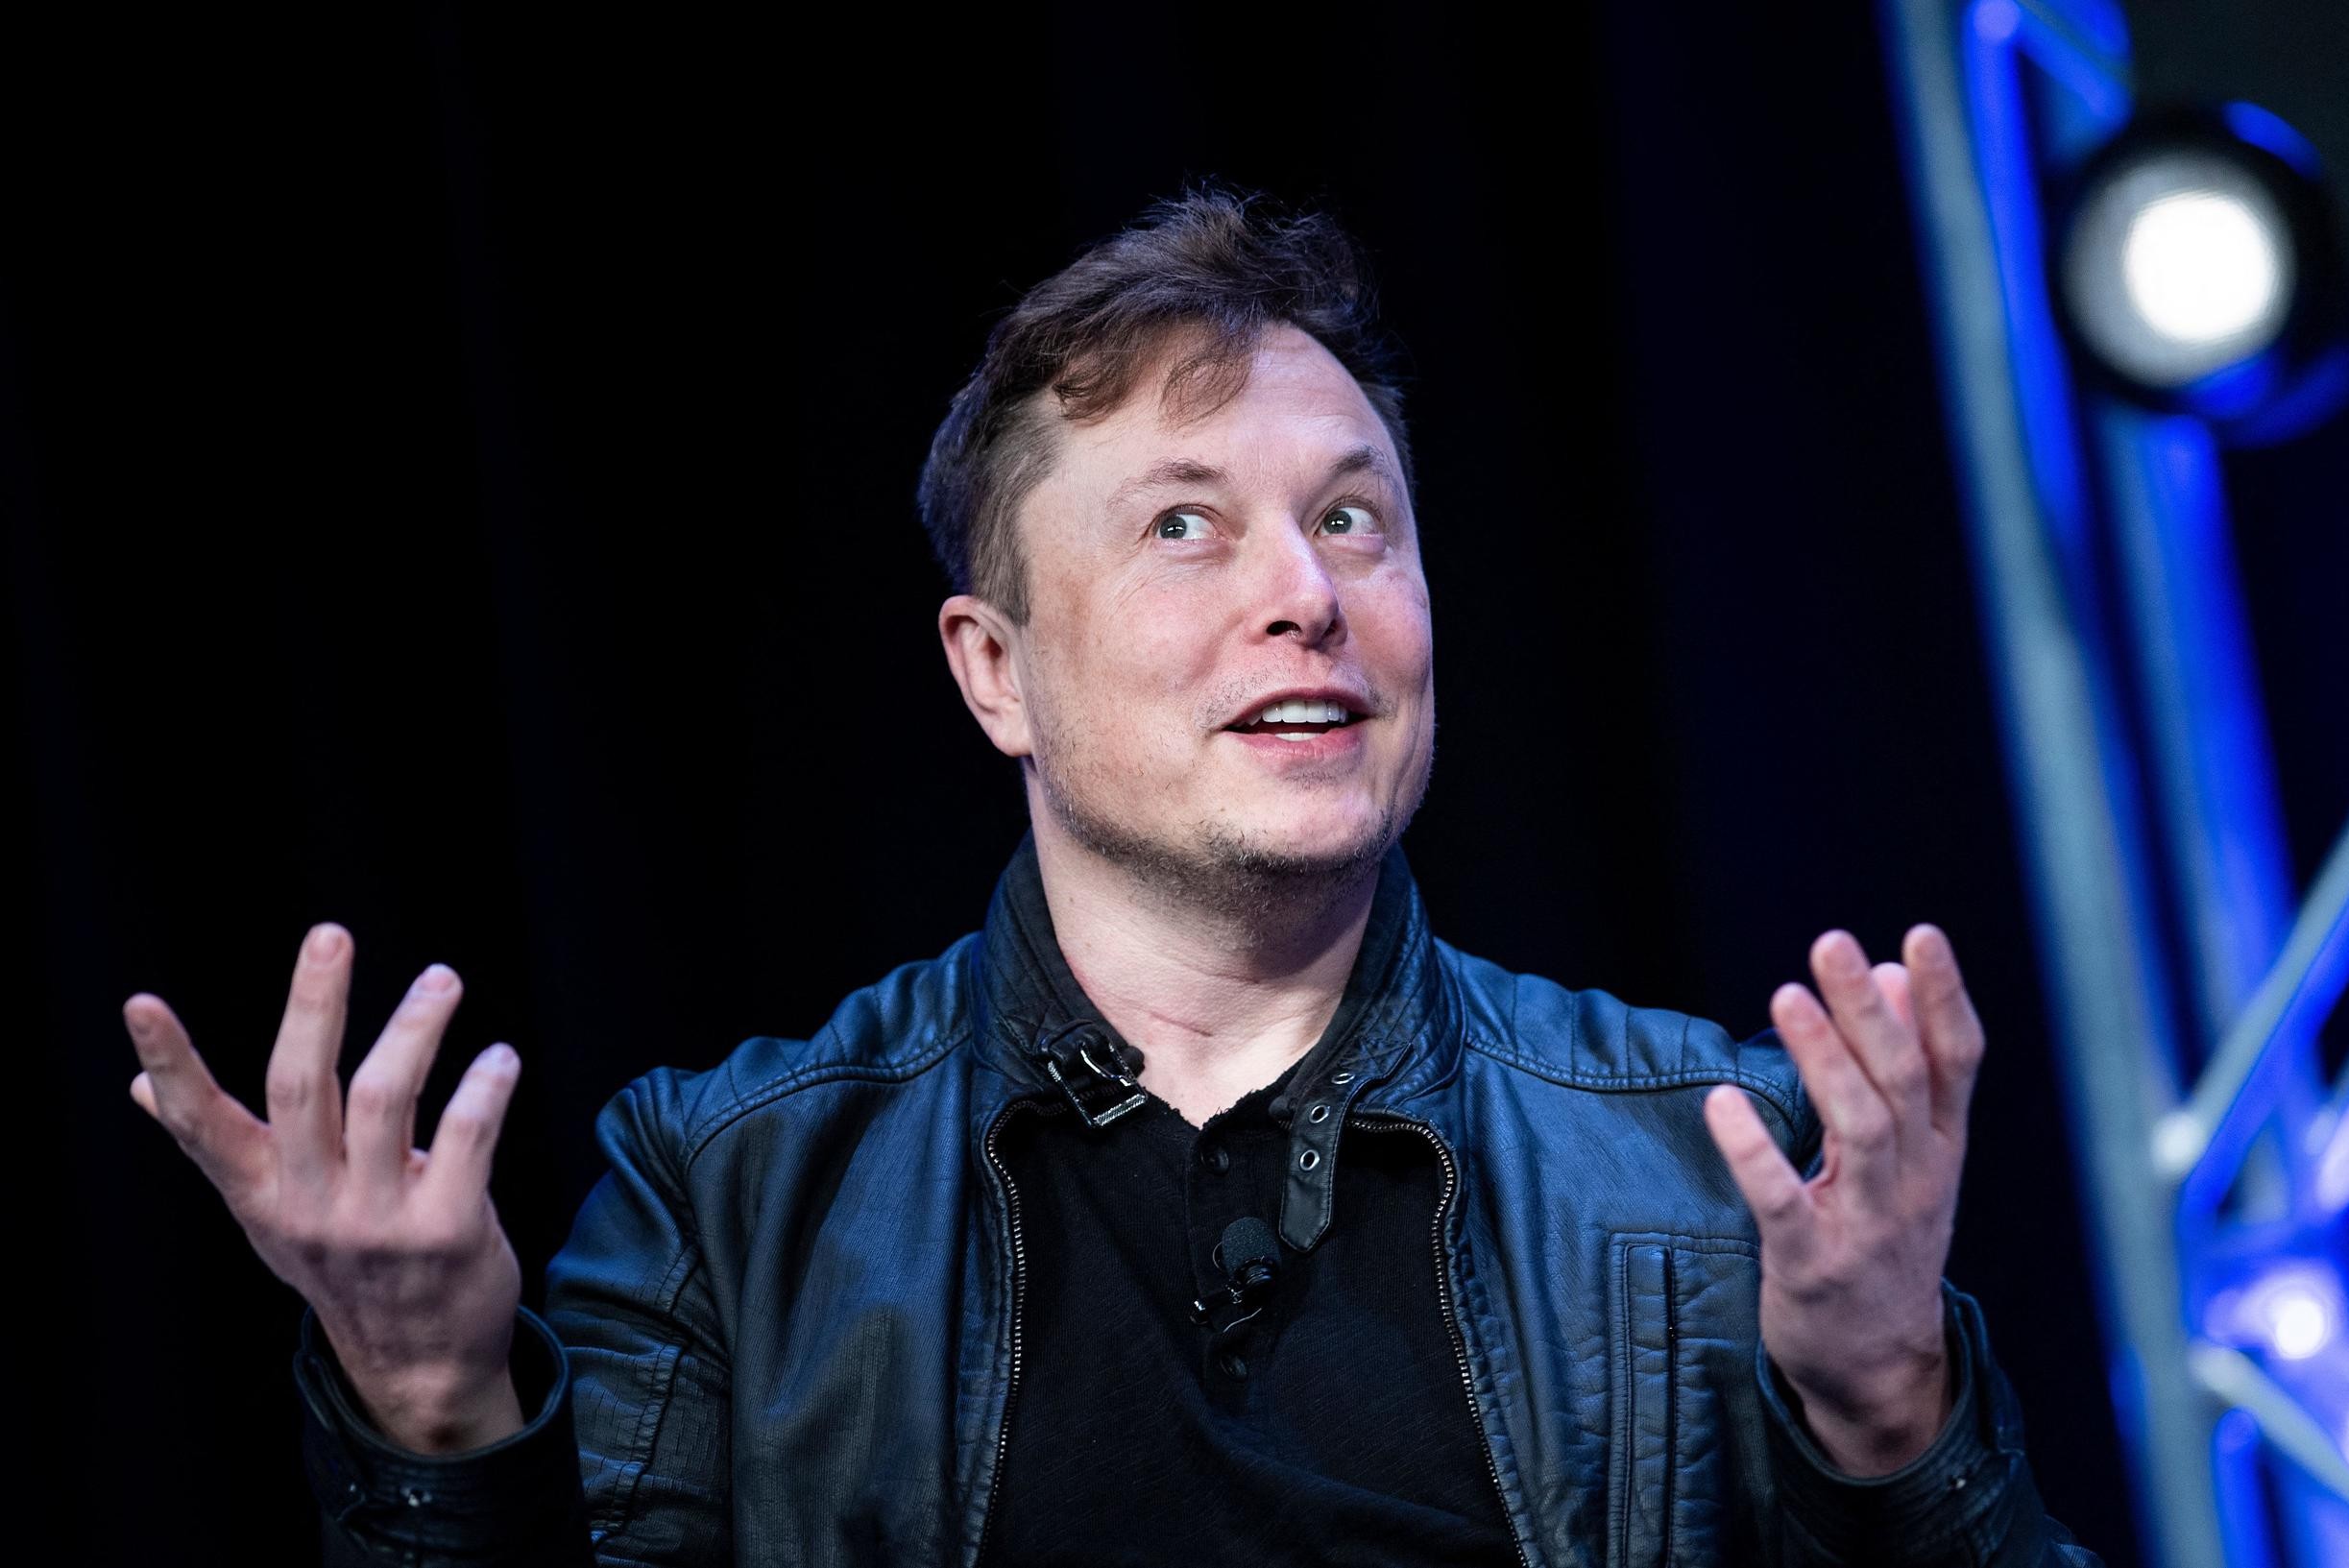 After all, Elon Musk will not be joining the Twitter board of directors